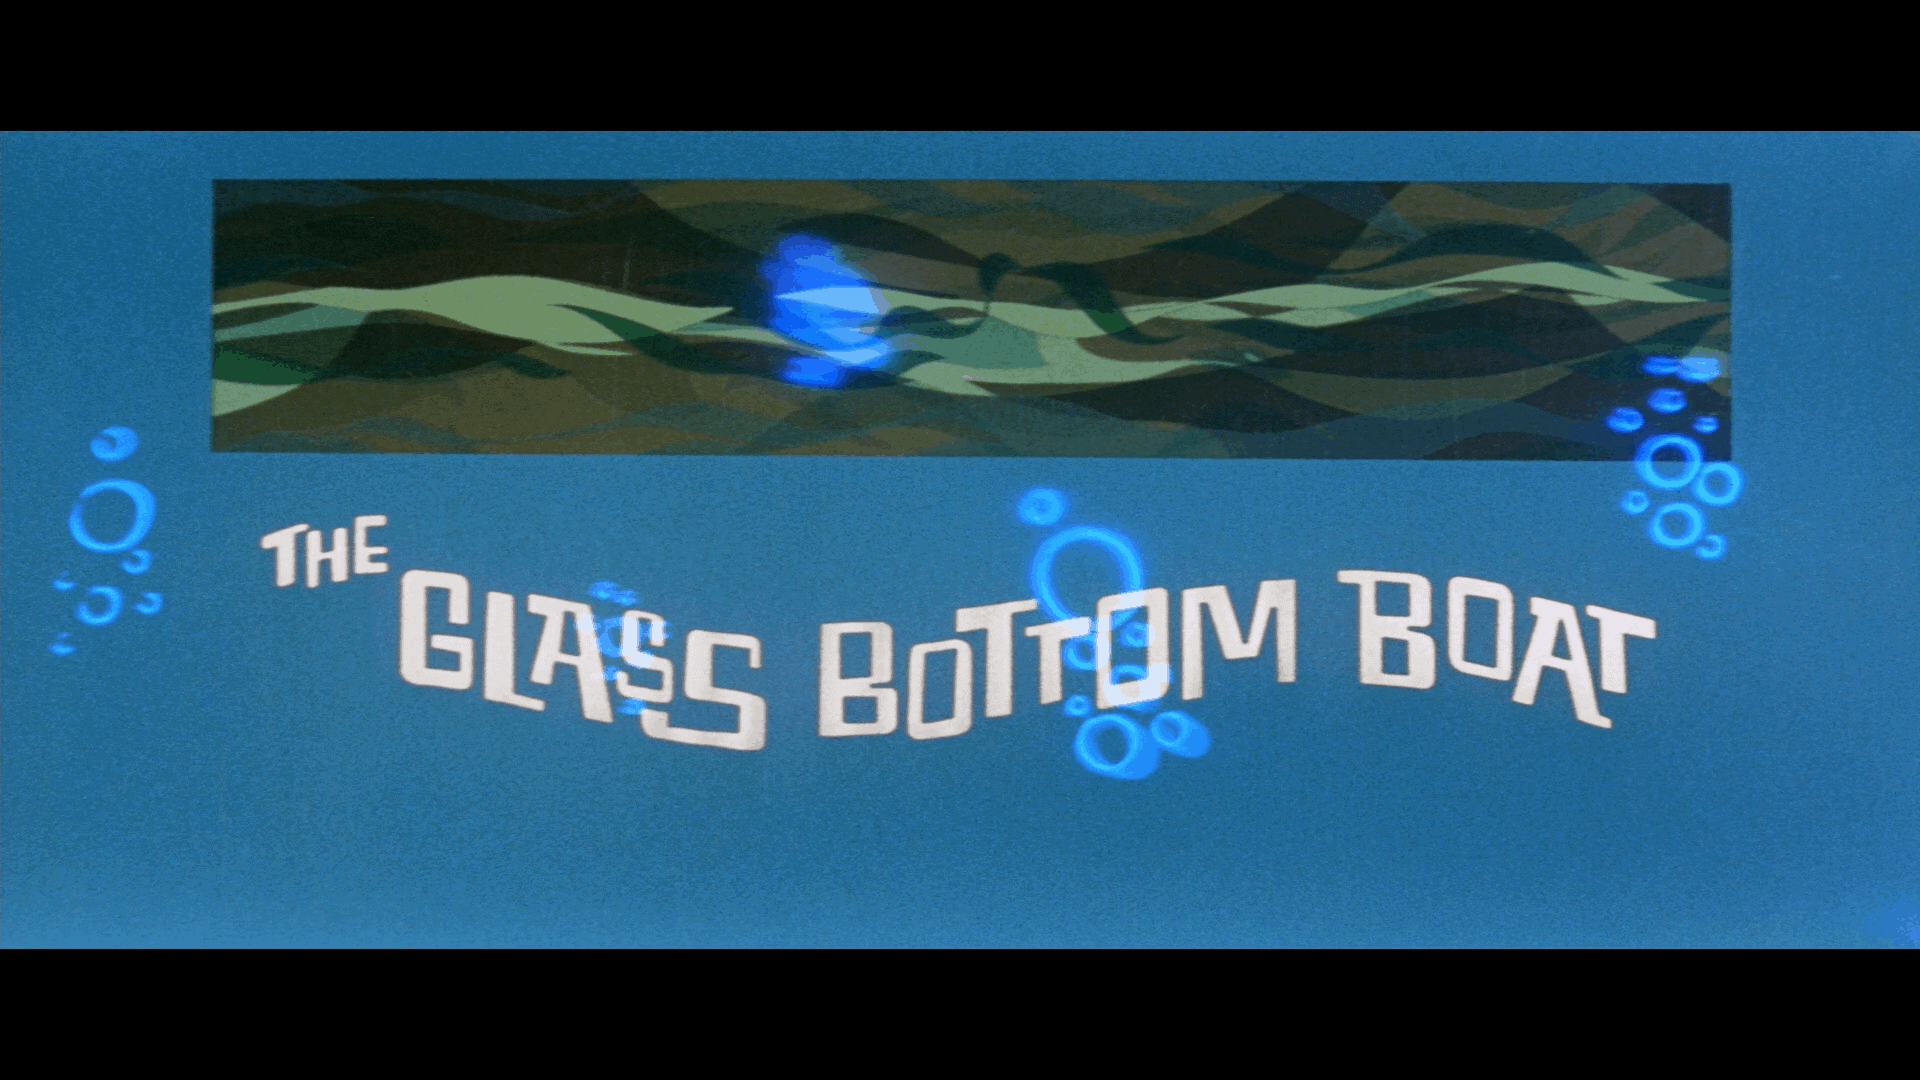 the glass bottom boat title